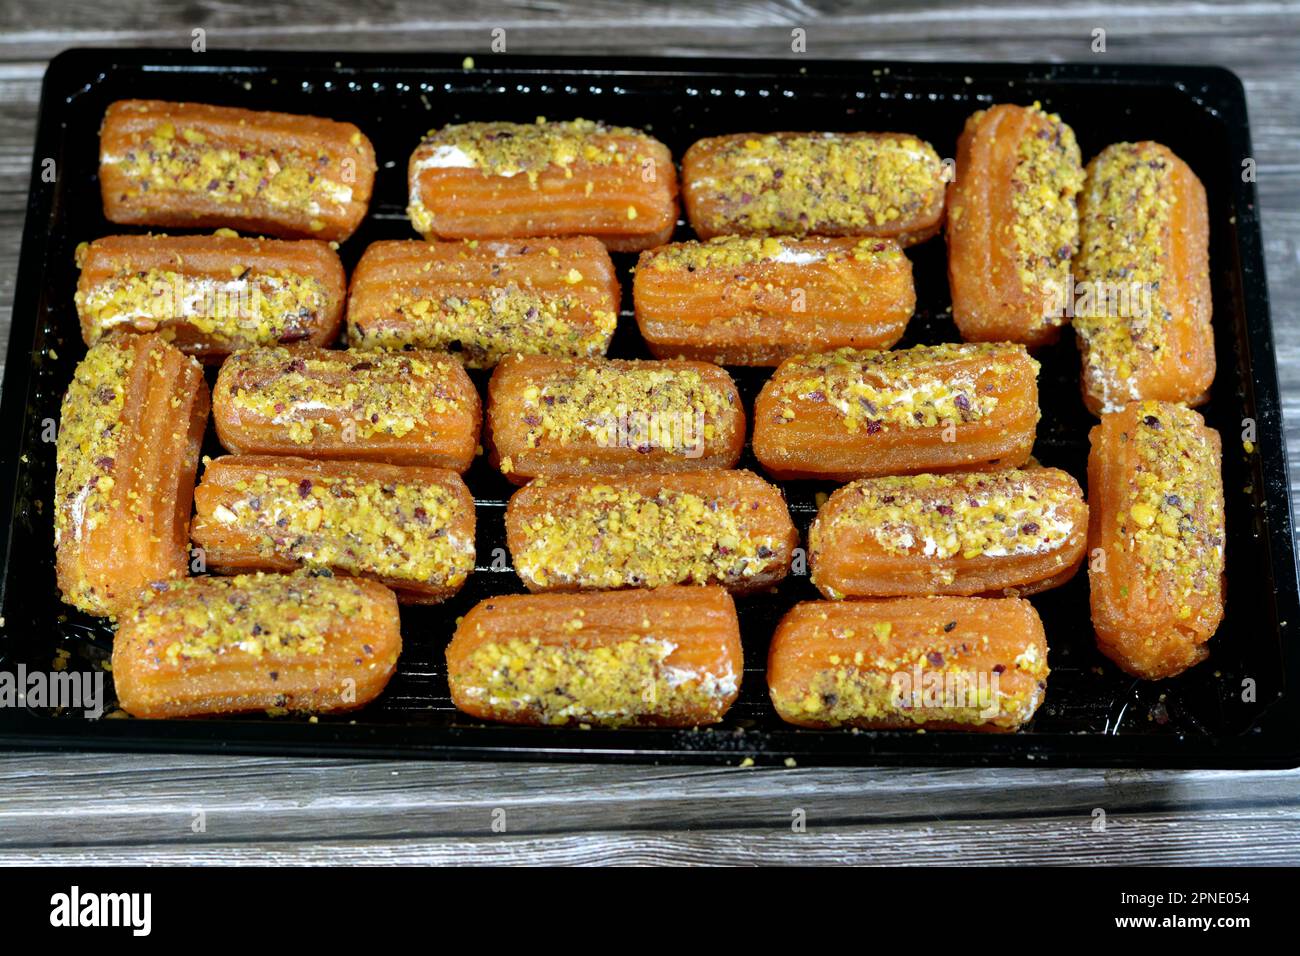 Tulumba, Bamiyeh or Balah El Sham stuffued with whipped cream and covered with pistachios and nuts, deep fried batter dessert soaked in syrup, similar Stock Photo